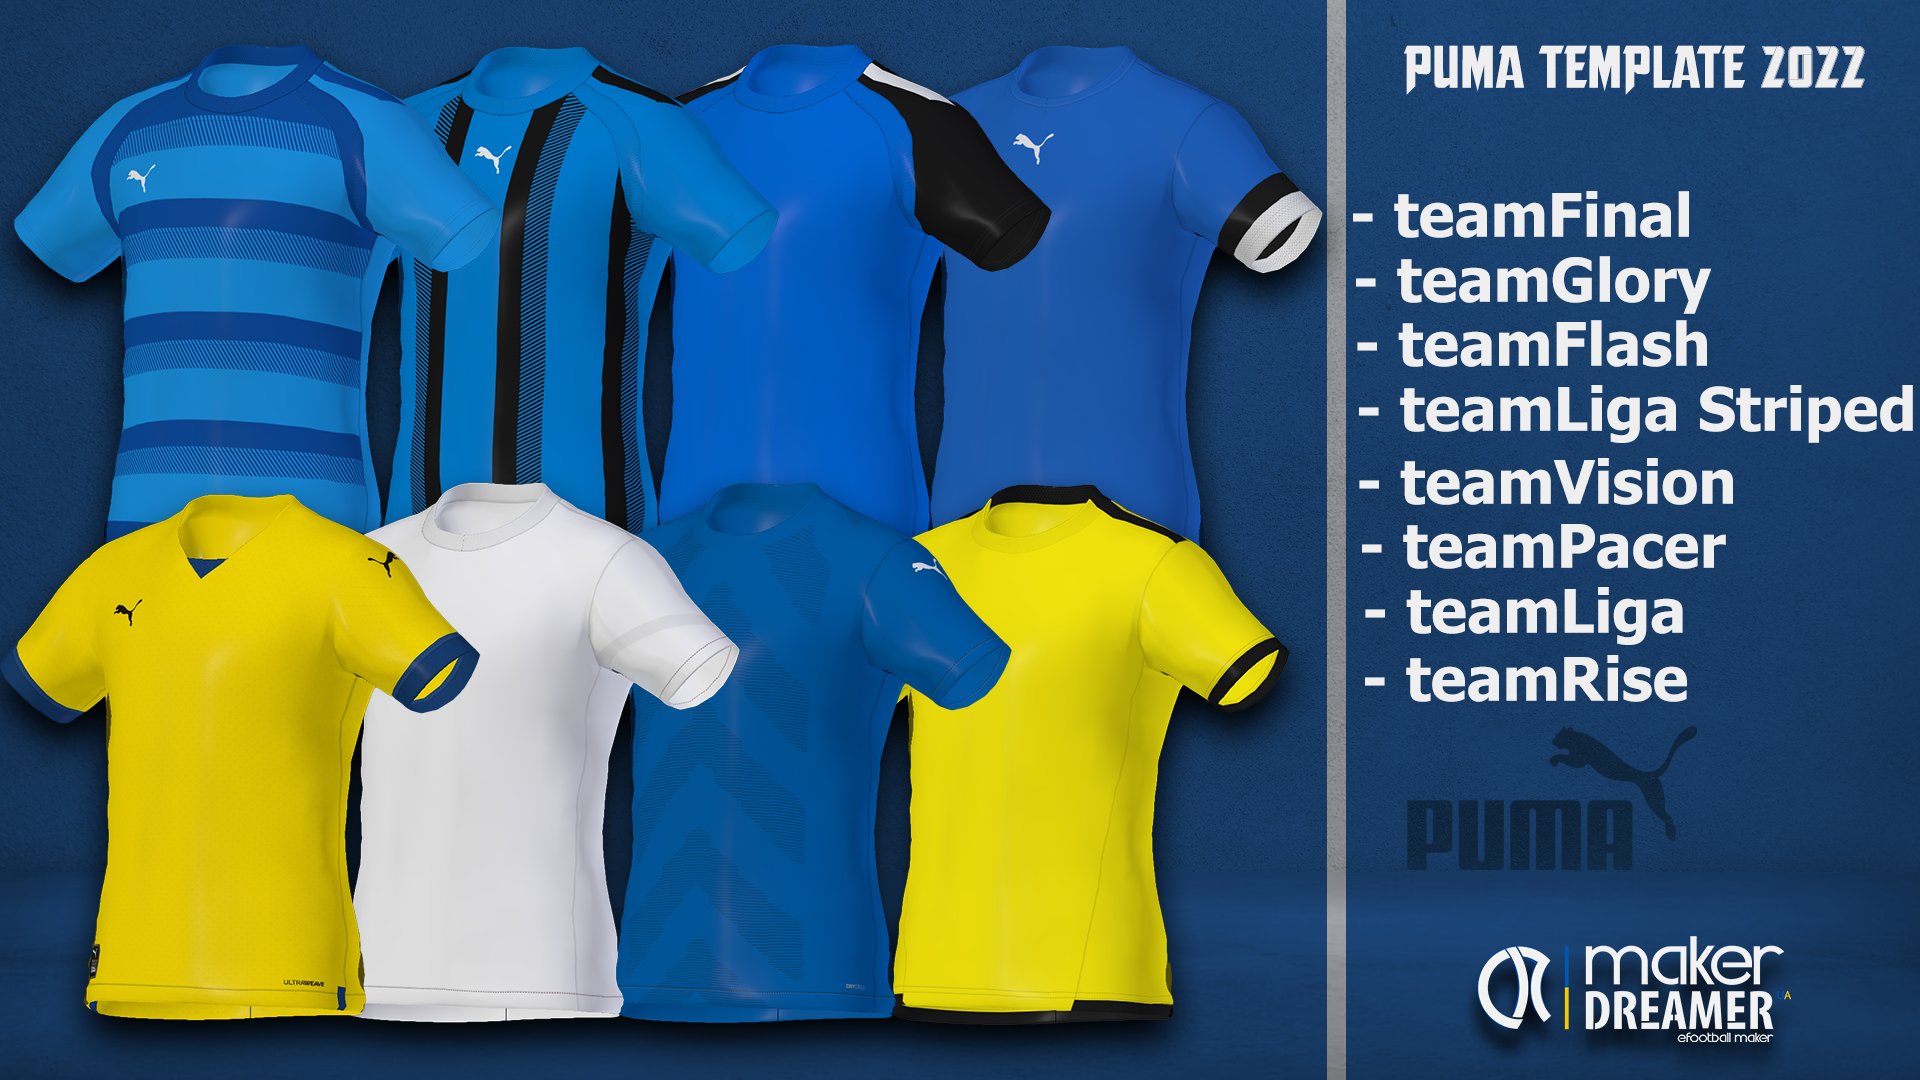 eFootball Maker_DREAMER on Twitter: "Puma Templates 2022 makerDreamer You can buy templates from me, I also make custom forms! PayPal: ivan.ironbets100@gmail.com #pumateamwear #puma #efootball2022 #makerdreamer #kitmakerdreamer #kitmaker #dreamer ...